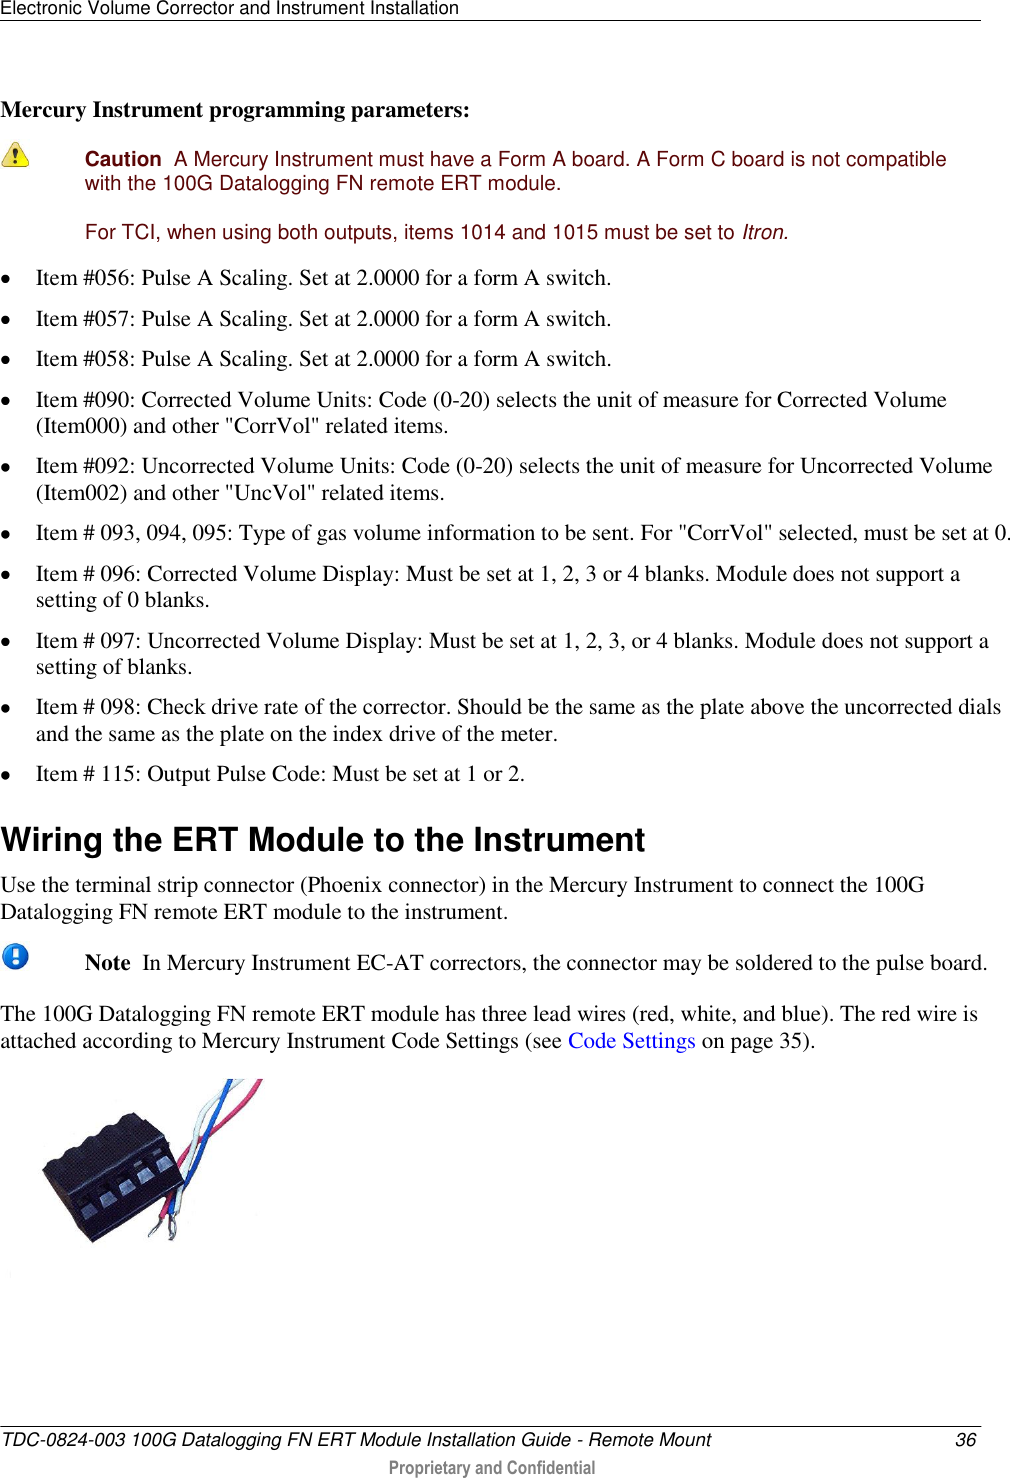 Electronic Volume Corrector and Instrument Installation   TDC-0824-003 100G Datalogging FN ERT Module Installation Guide - Remote Mount  36  Proprietary and Confidential    Mercury Instrument programming parameters:  Caution  A Mercury Instrument must have a Form A board. A Form C board is not compatible with the 100G Datalogging FN remote ERT module. For TCI, when using both outputs, items 1014 and 1015 must be set to Itron.  Item #056: Pulse A Scaling. Set at 2.0000 for a form A switch.  Item #057: Pulse A Scaling. Set at 2.0000 for a form A switch.  Item #058: Pulse A Scaling. Set at 2.0000 for a form A switch.  Item #090: Corrected Volume Units: Code (0-20) selects the unit of measure for Corrected Volume (Item000) and other &quot;CorrVol&quot; related items.  Item #092: Uncorrected Volume Units: Code (0-20) selects the unit of measure for Uncorrected Volume (Item002) and other &quot;UncVol&quot; related items.  Item # 093, 094, 095: Type of gas volume information to be sent. For &quot;CorrVol&quot; selected, must be set at 0.  Item # 096: Corrected Volume Display: Must be set at 1, 2, 3 or 4 blanks. Module does not support a setting of 0 blanks.  Item # 097: Uncorrected Volume Display: Must be set at 1, 2, 3, or 4 blanks. Module does not support a setting of blanks.  Item # 098: Check drive rate of the corrector. Should be the same as the plate above the uncorrected dials and the same as the plate on the index drive of the meter.  Item # 115: Output Pulse Code: Must be set at 1 or 2.  Wiring the ERT Module to the Instrument Use the terminal strip connector (Phoenix connector) in the Mercury Instrument to connect the 100G Datalogging FN remote ERT module to the instrument.   Note  In Mercury Instrument EC-AT correctors, the connector may be soldered to the pulse board. The 100G Datalogging FN remote ERT module has three lead wires (red, white, and blue). The red wire is attached according to Mercury Instrument Code Settings (see Code Settings on page 35).   